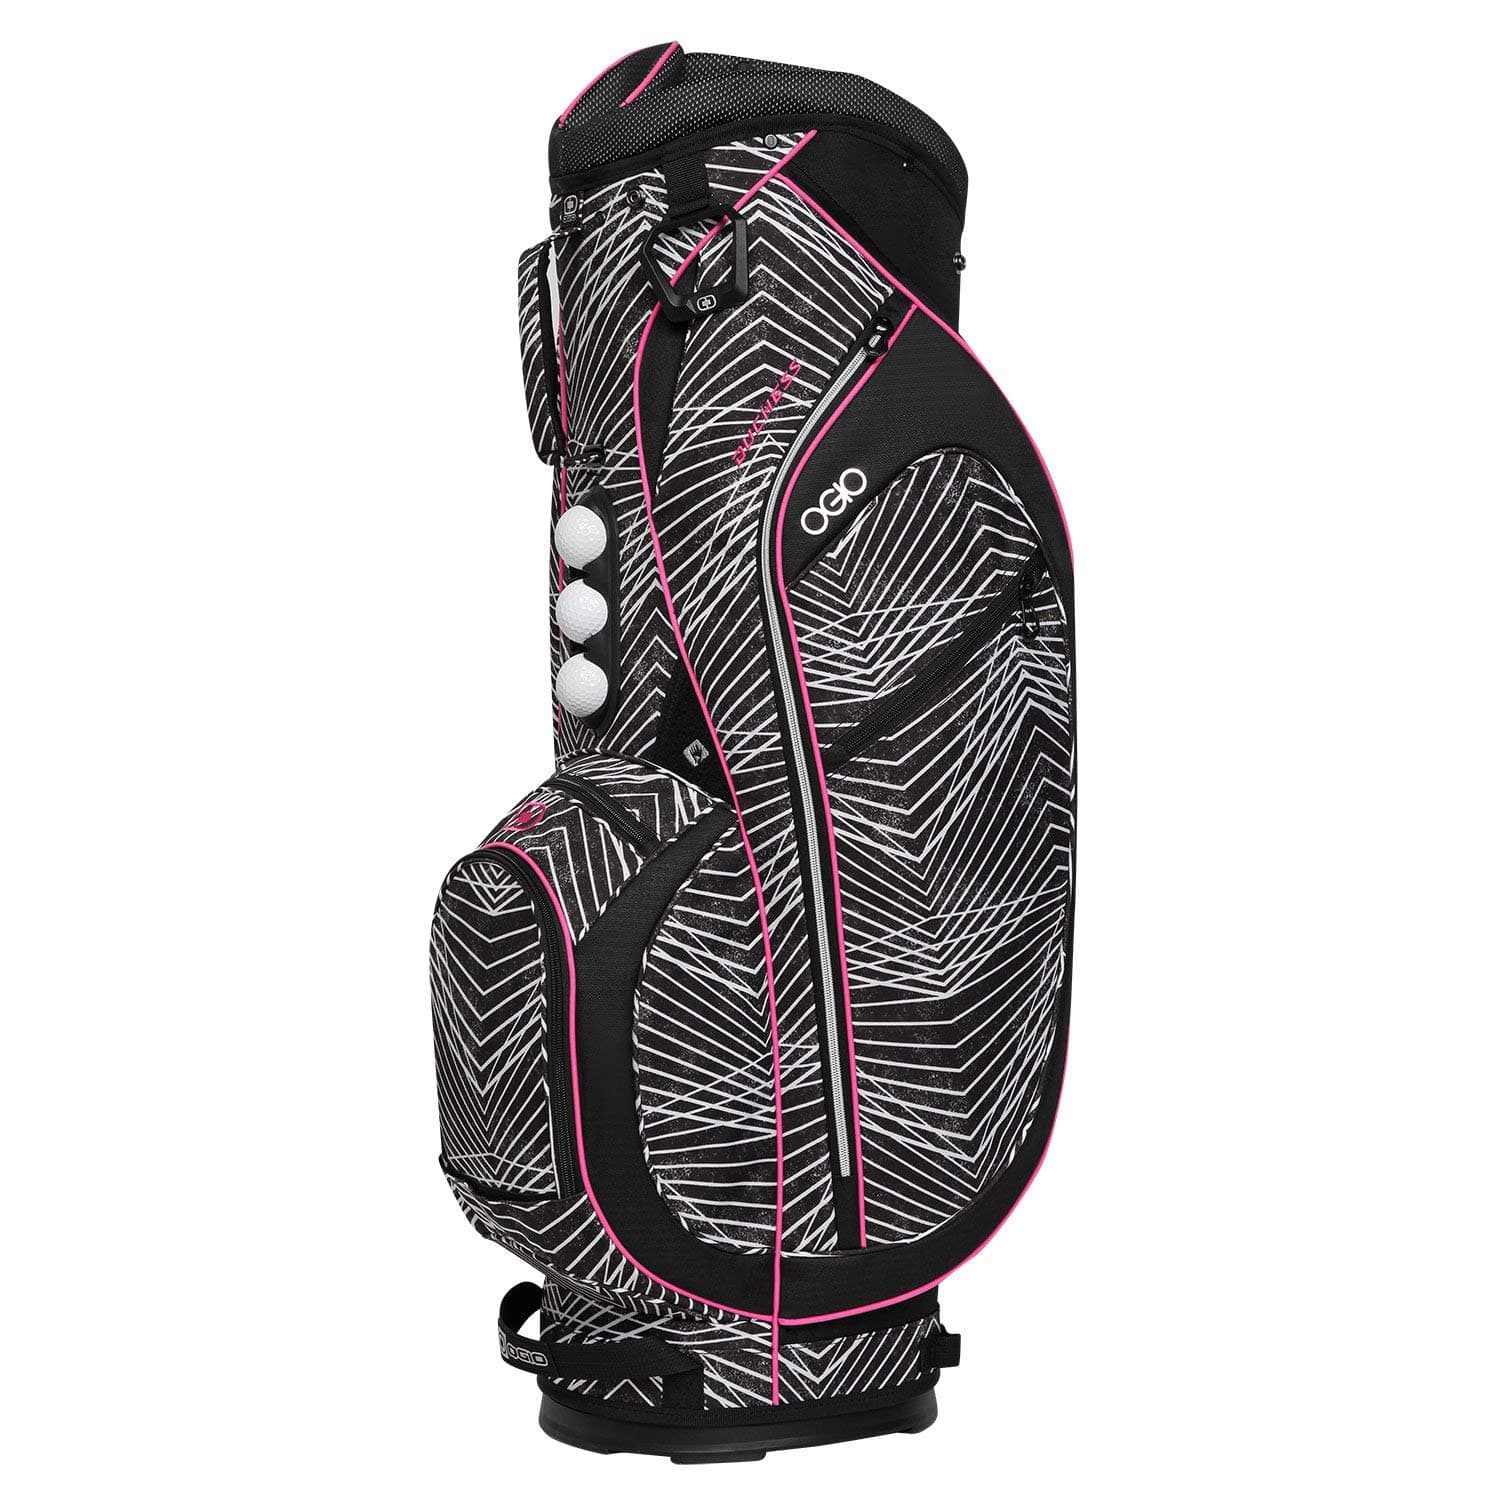 10 Best Golf Bags For Women 2019 - (MUST READ Before You Buy)